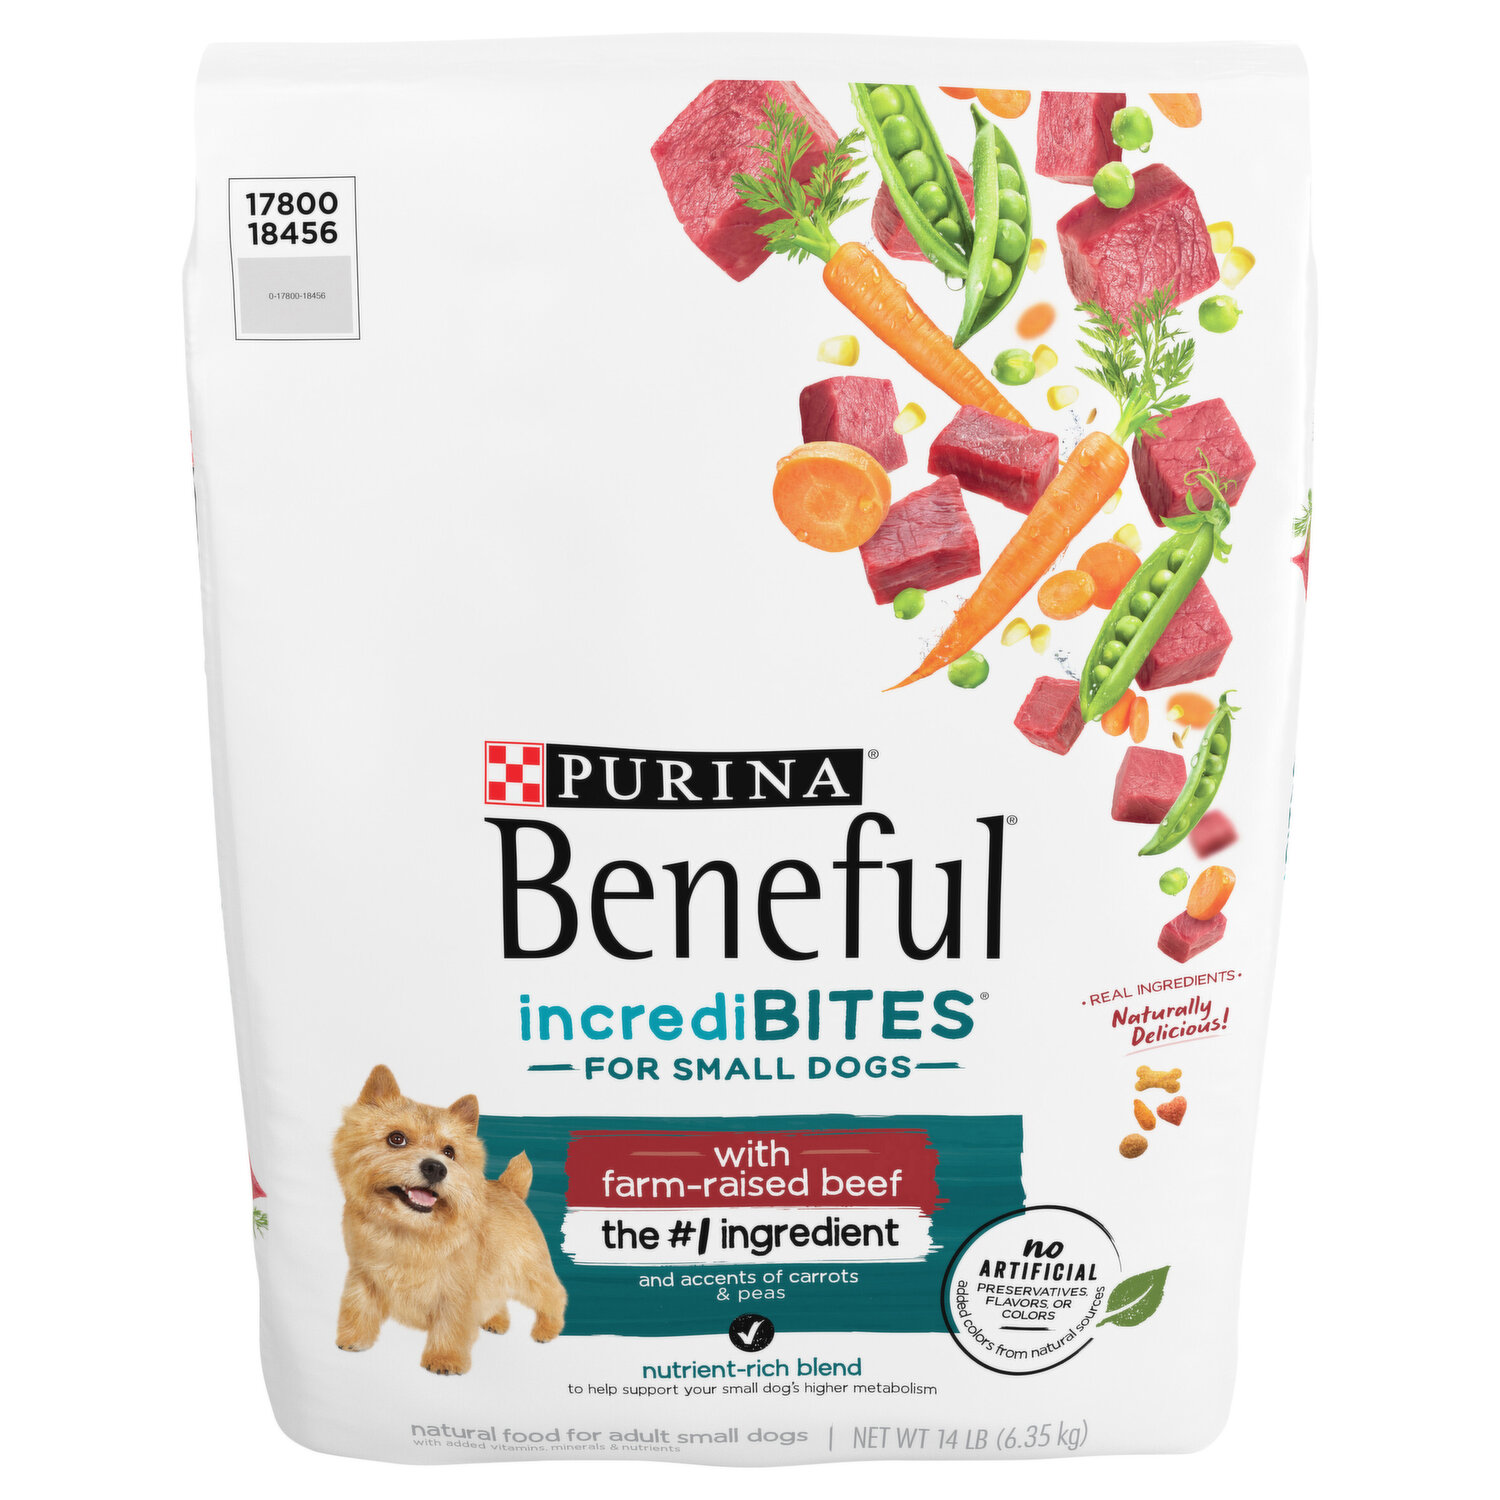 Beneful Dog Food, with Farm-Raised Beef, Adult Small Dogs